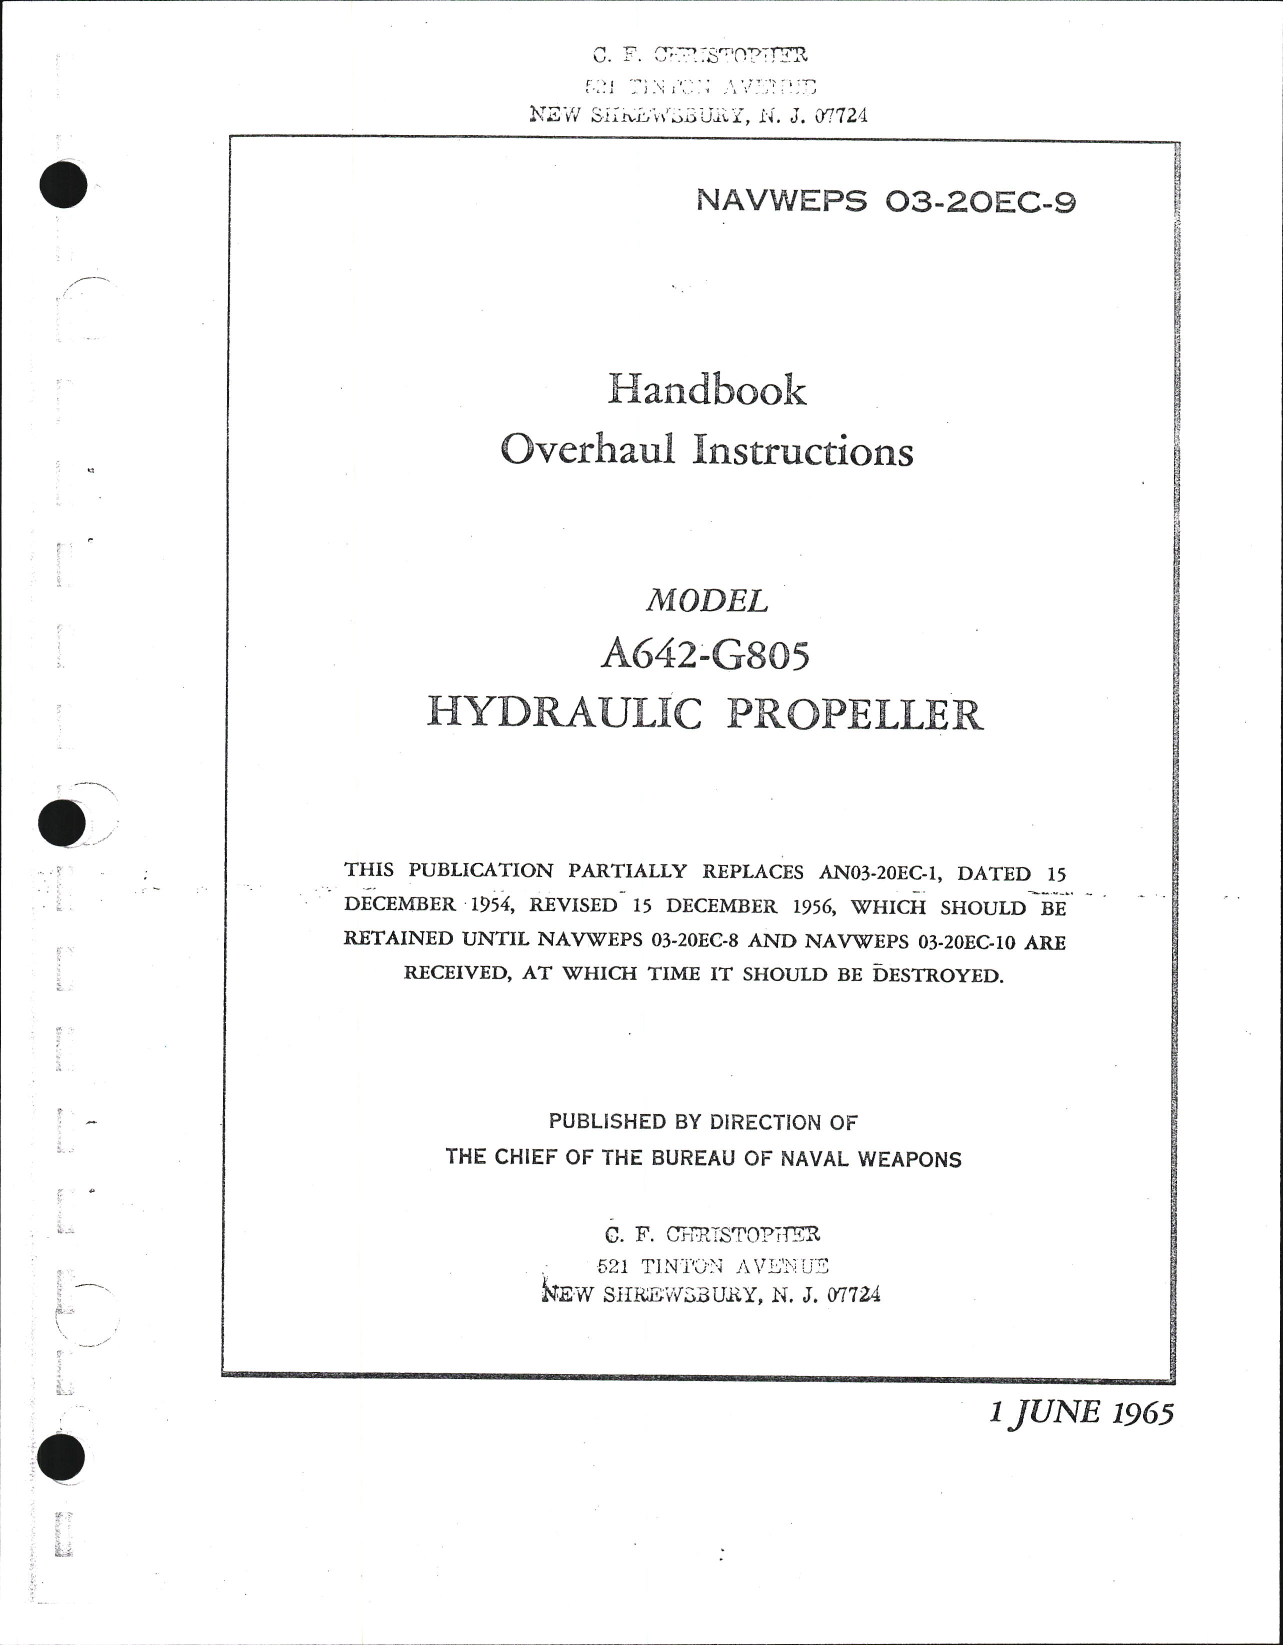 Sample page 5 from AirCorps Library document: Overhaul Instructions for Allison Hydraulic Propeller Model A642-G805